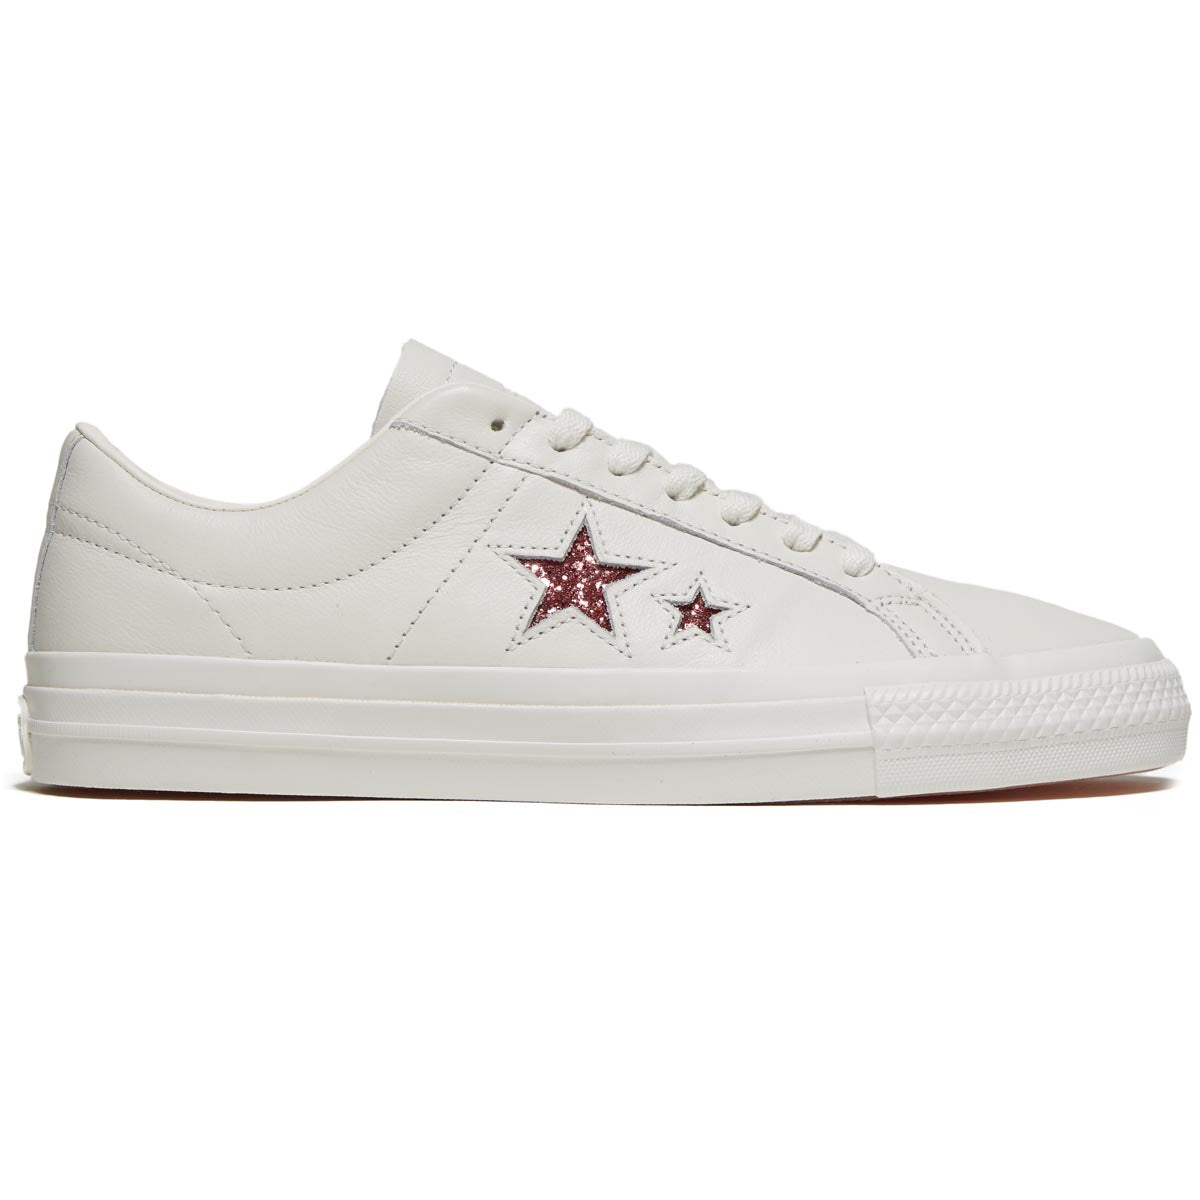 Converse x Turnstile One Star Pro Ox Shoes - White/Pink/White image 1